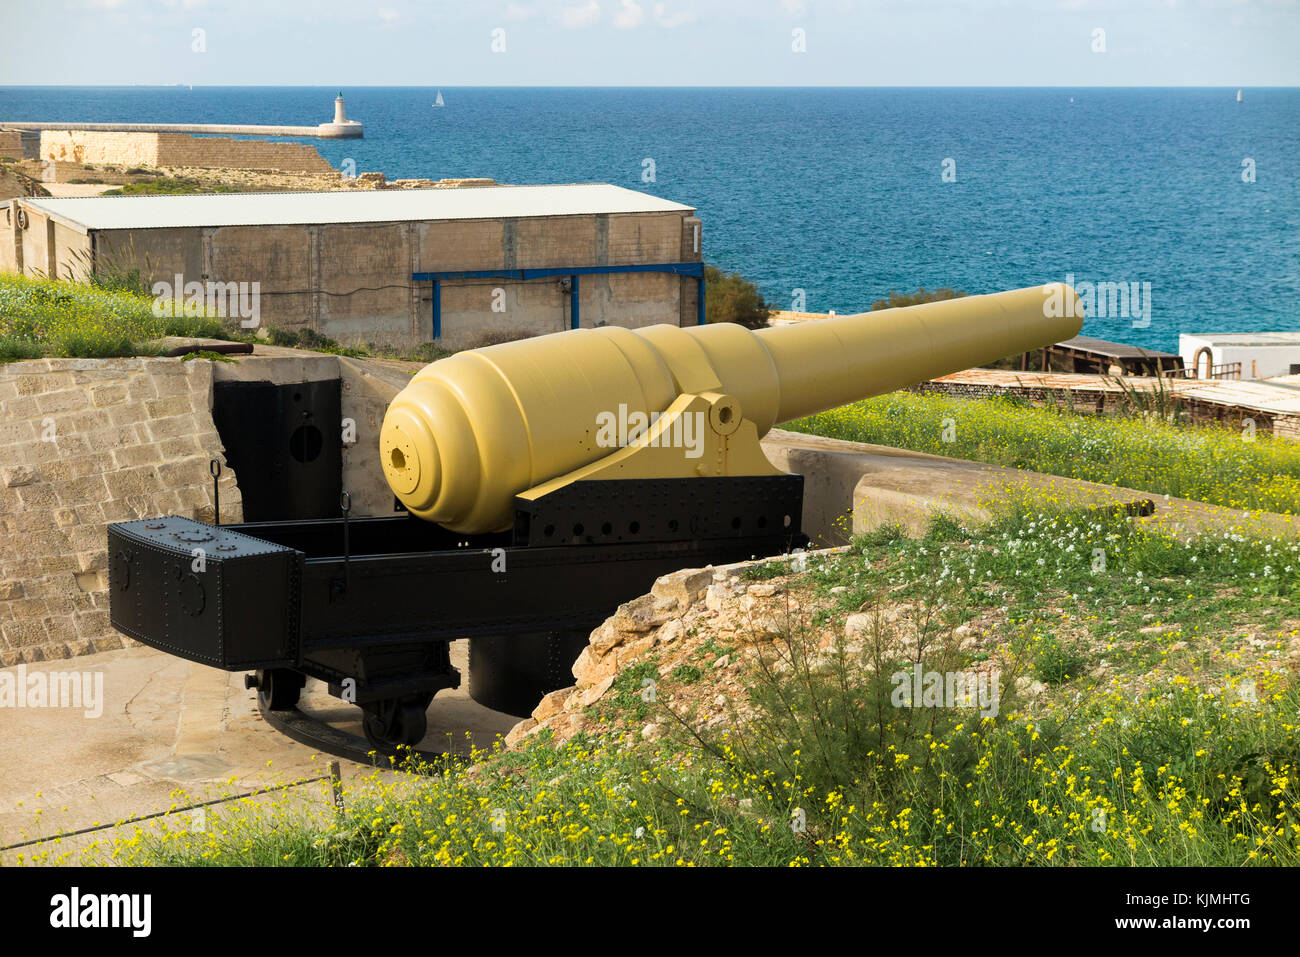 The Armstrong 100 ton gun at Fort Rinella, Malta. The muzzle loading 100 ton gun is the largest front loading cannon / gun battery in the world. (91) Stock Photo